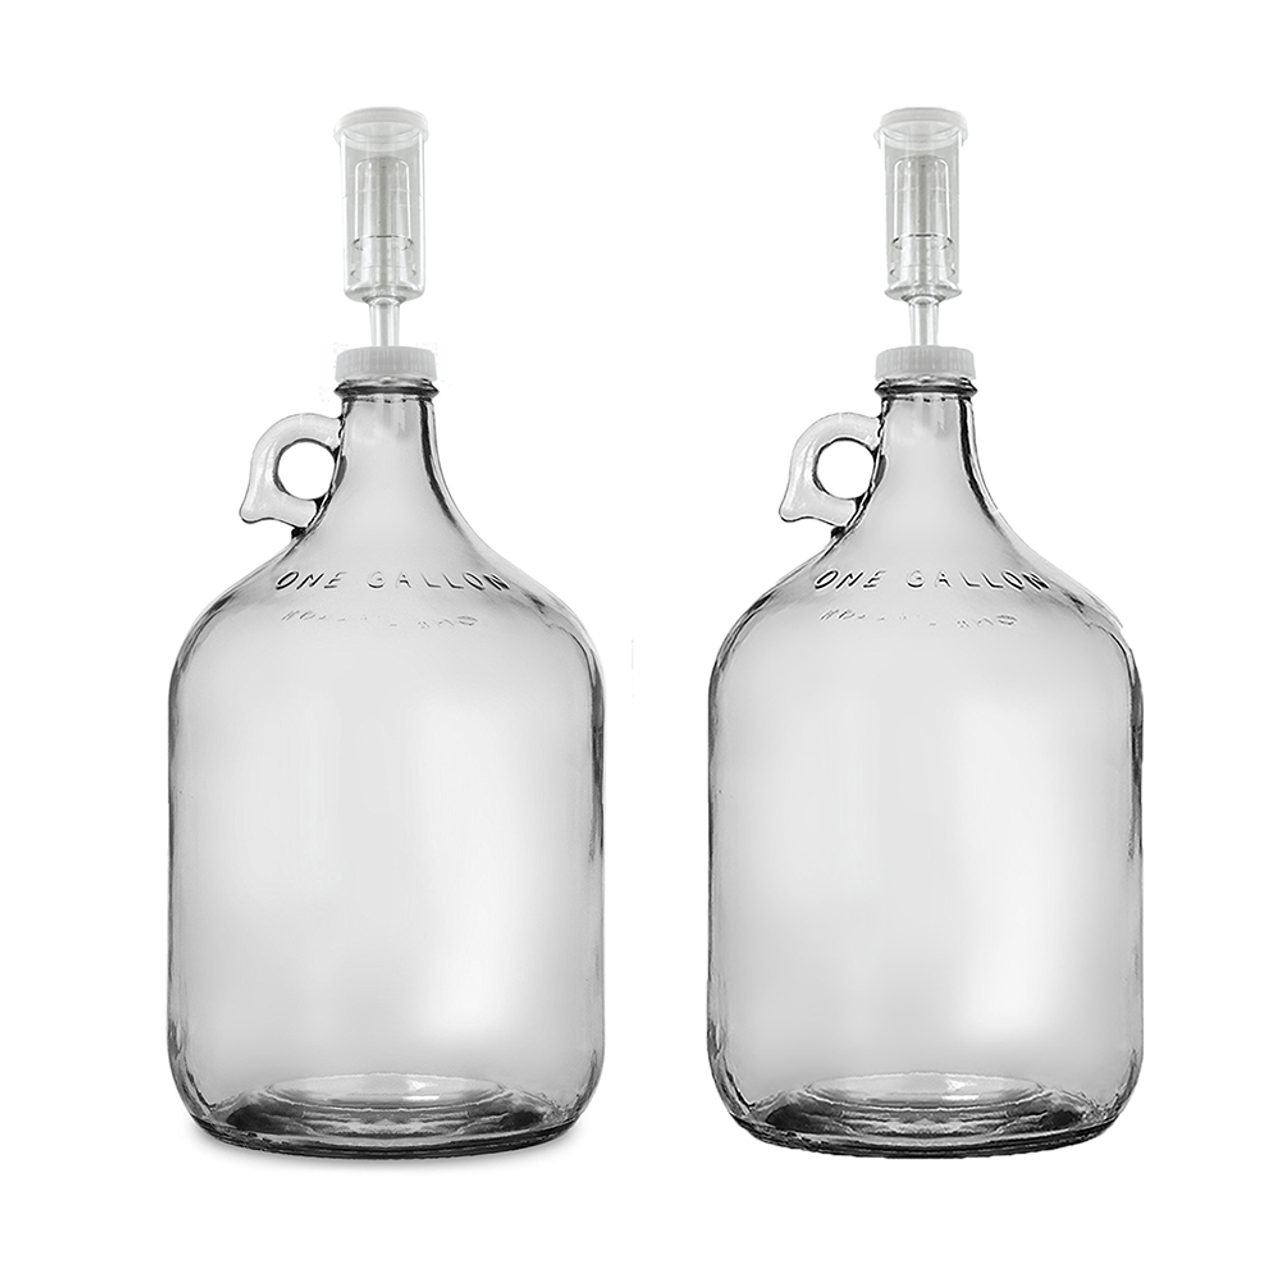 https://cdn11.bigcommerce.com/s-1x0gz1809s/images/stencil/1280x1280/products/4316/12638/home%20brew%20ohio%20one%20gallon%20glass%20jug%20with%2038mm%20cap%20with%20hole%20and%20airlock%20set%20of%202%20bc10__17530.1631038170.png?c=2